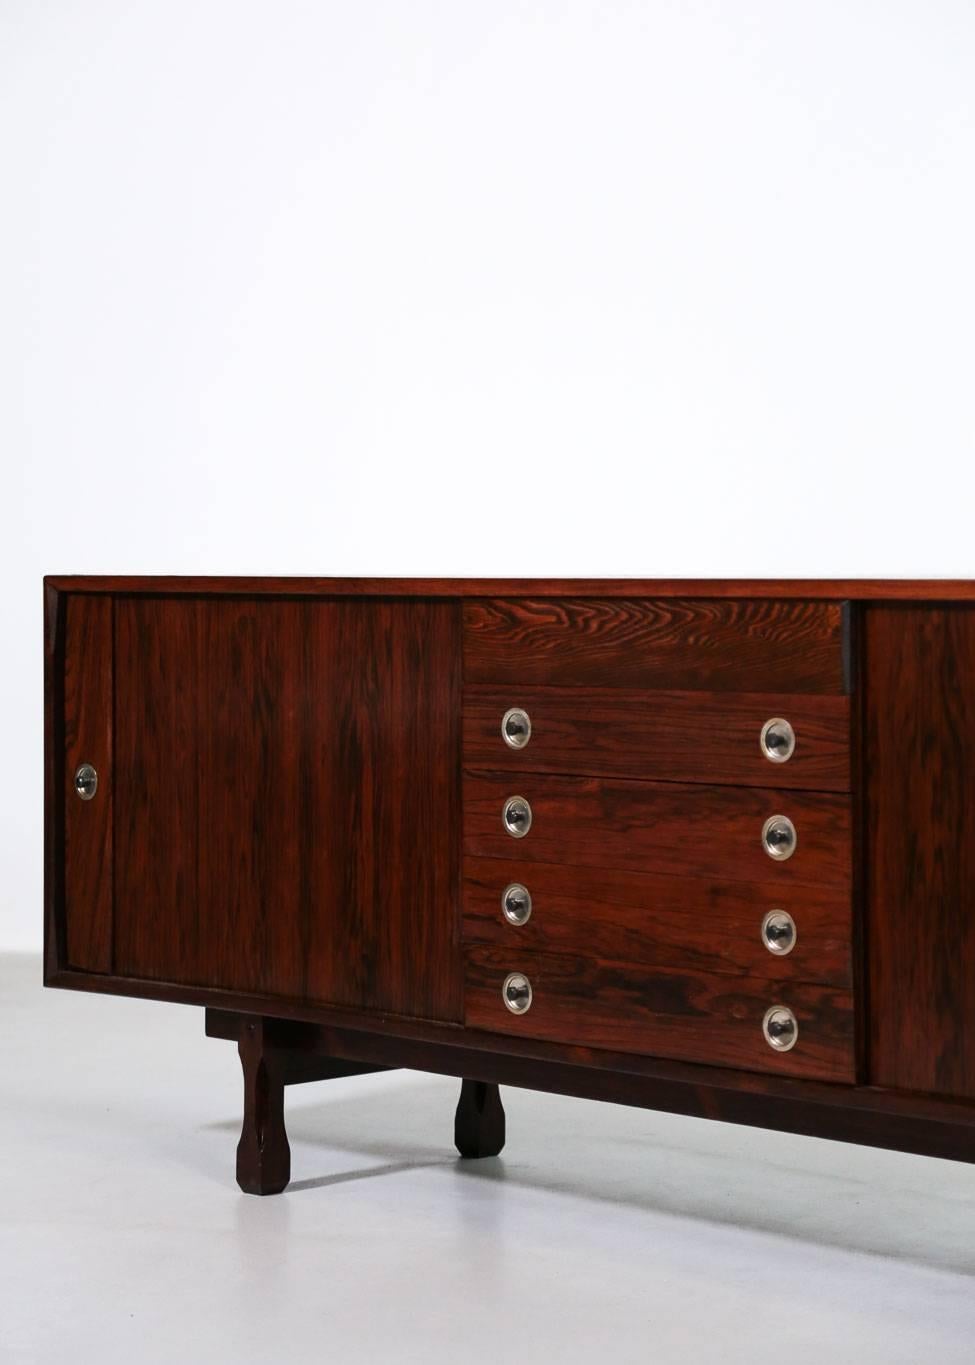 Italian Rosewood Sideboard, 1960s Design in Style of Gianfranco Frattini In Good Condition For Sale In Ternay, Auvergne-Rhône-Alpes